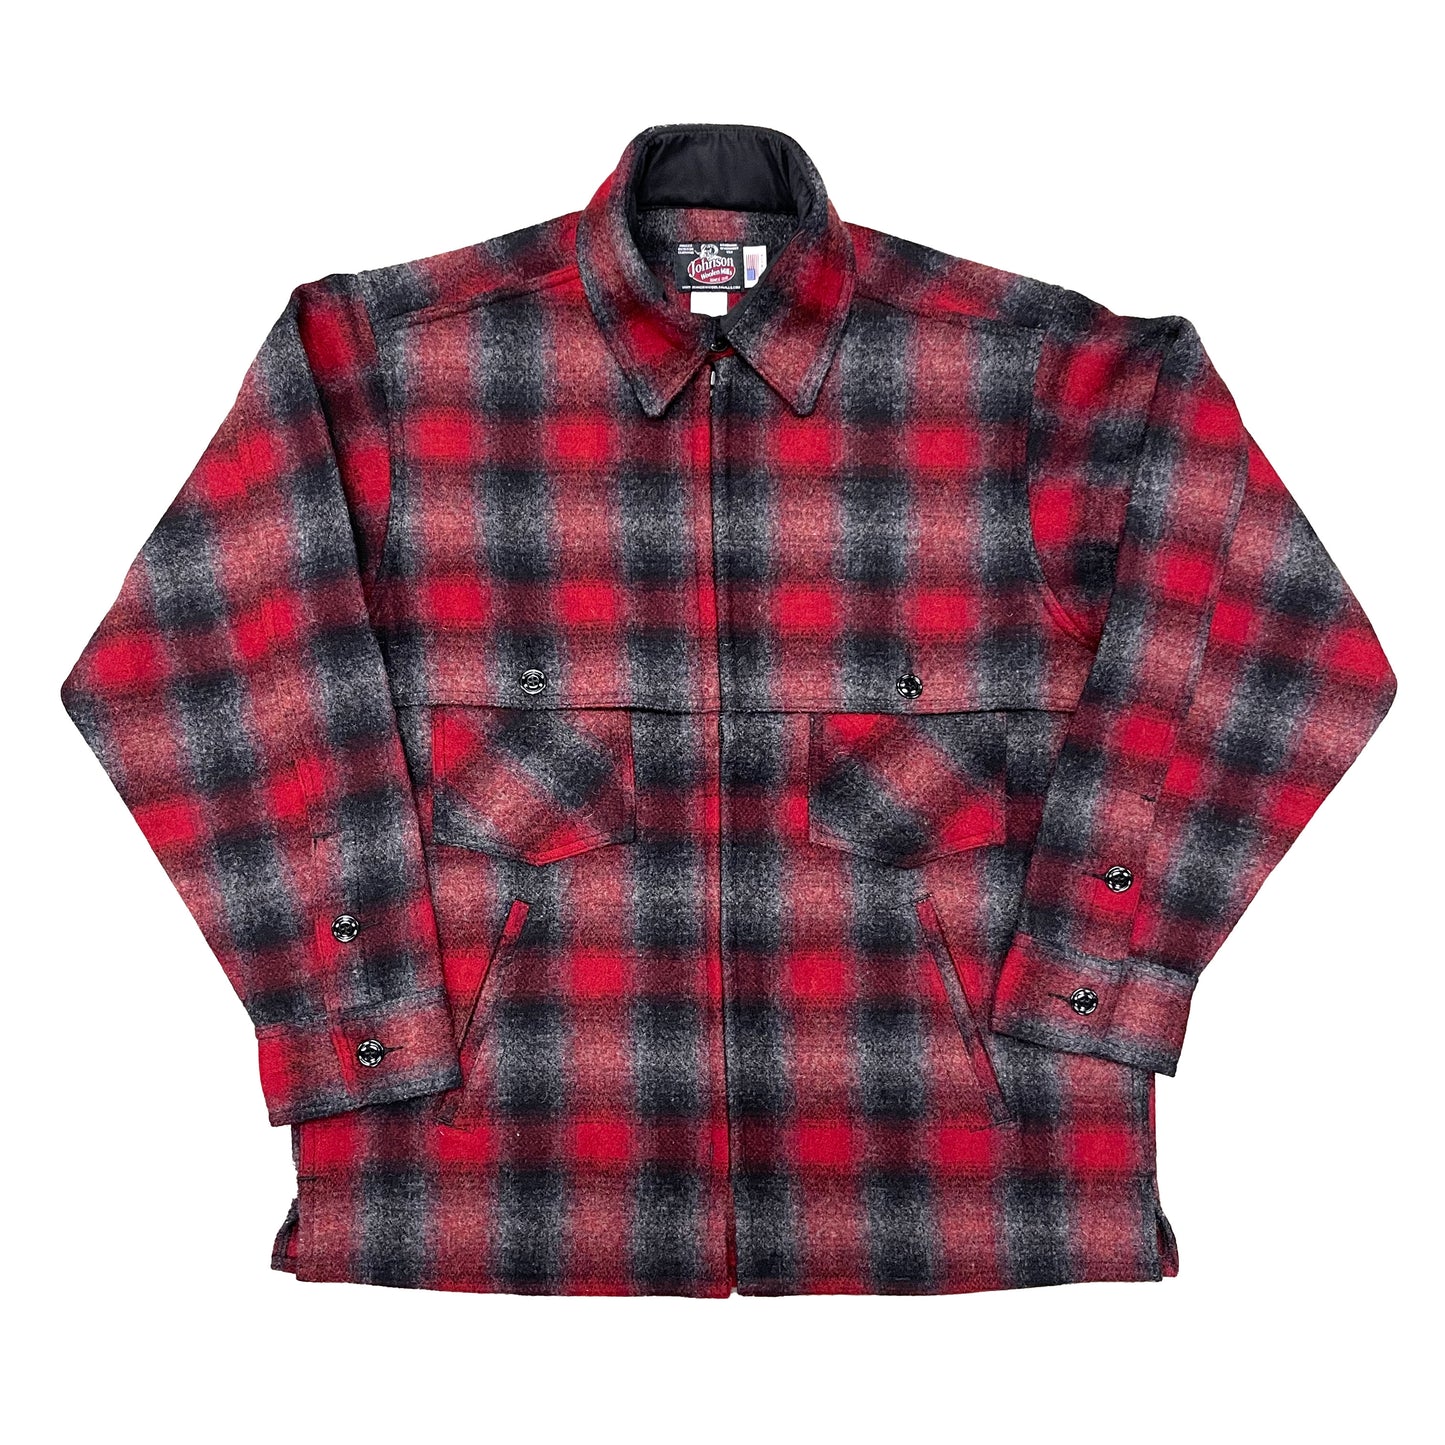 Mens Jac Shirt zipper front two chest pockets & two lower slash pockets, with cape over the shoulders, unlined, red black gray muted plaid